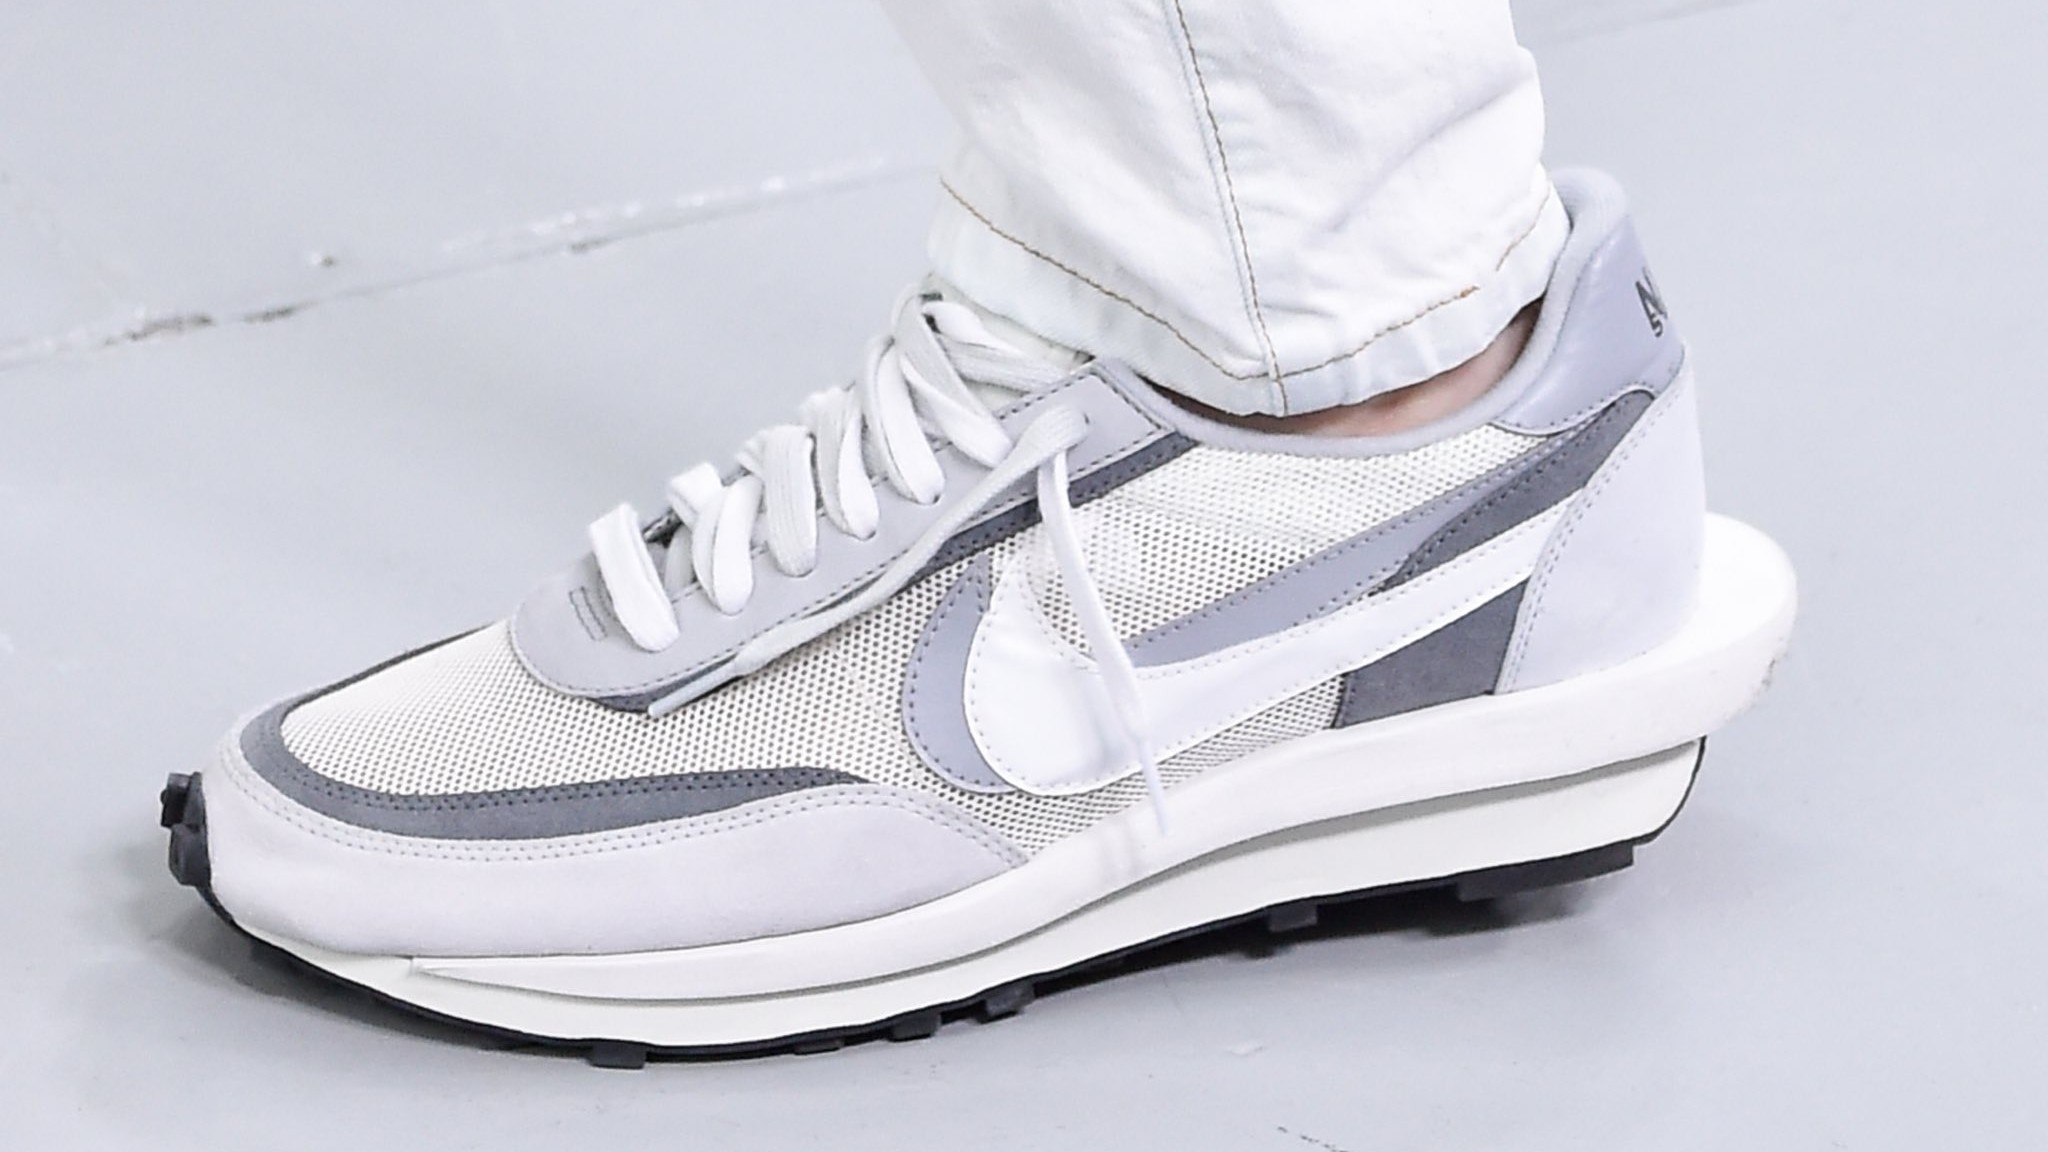 Sacai x Nike Hybrid Monochromatic Collection Preview | Sole Collector